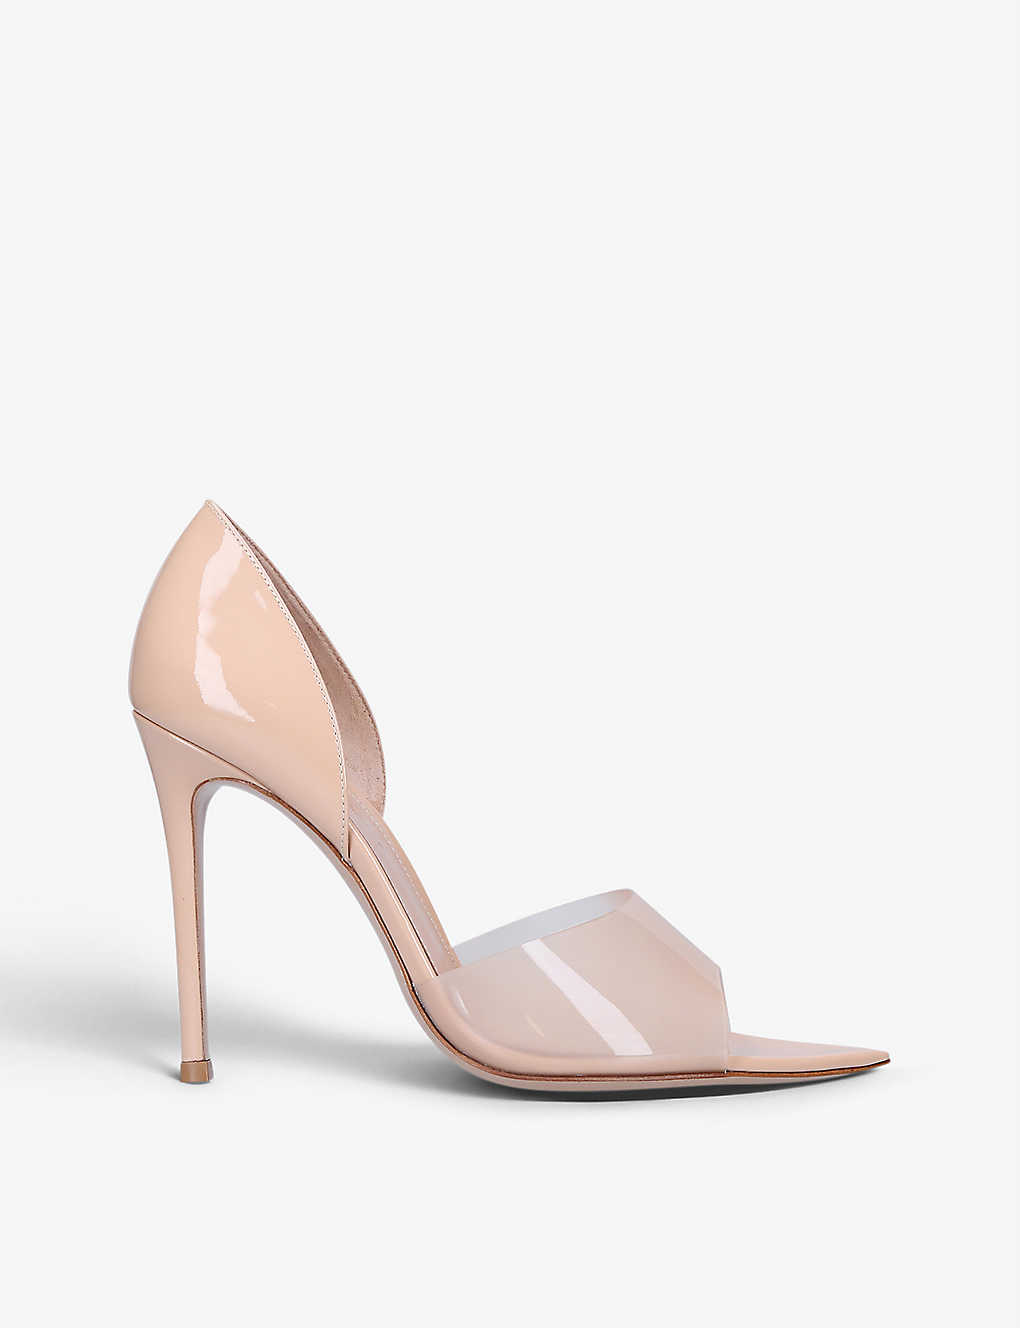 Gianvito Rossi Women's Blush Bree D'orsay Leather And Pvc Heeled Sandals